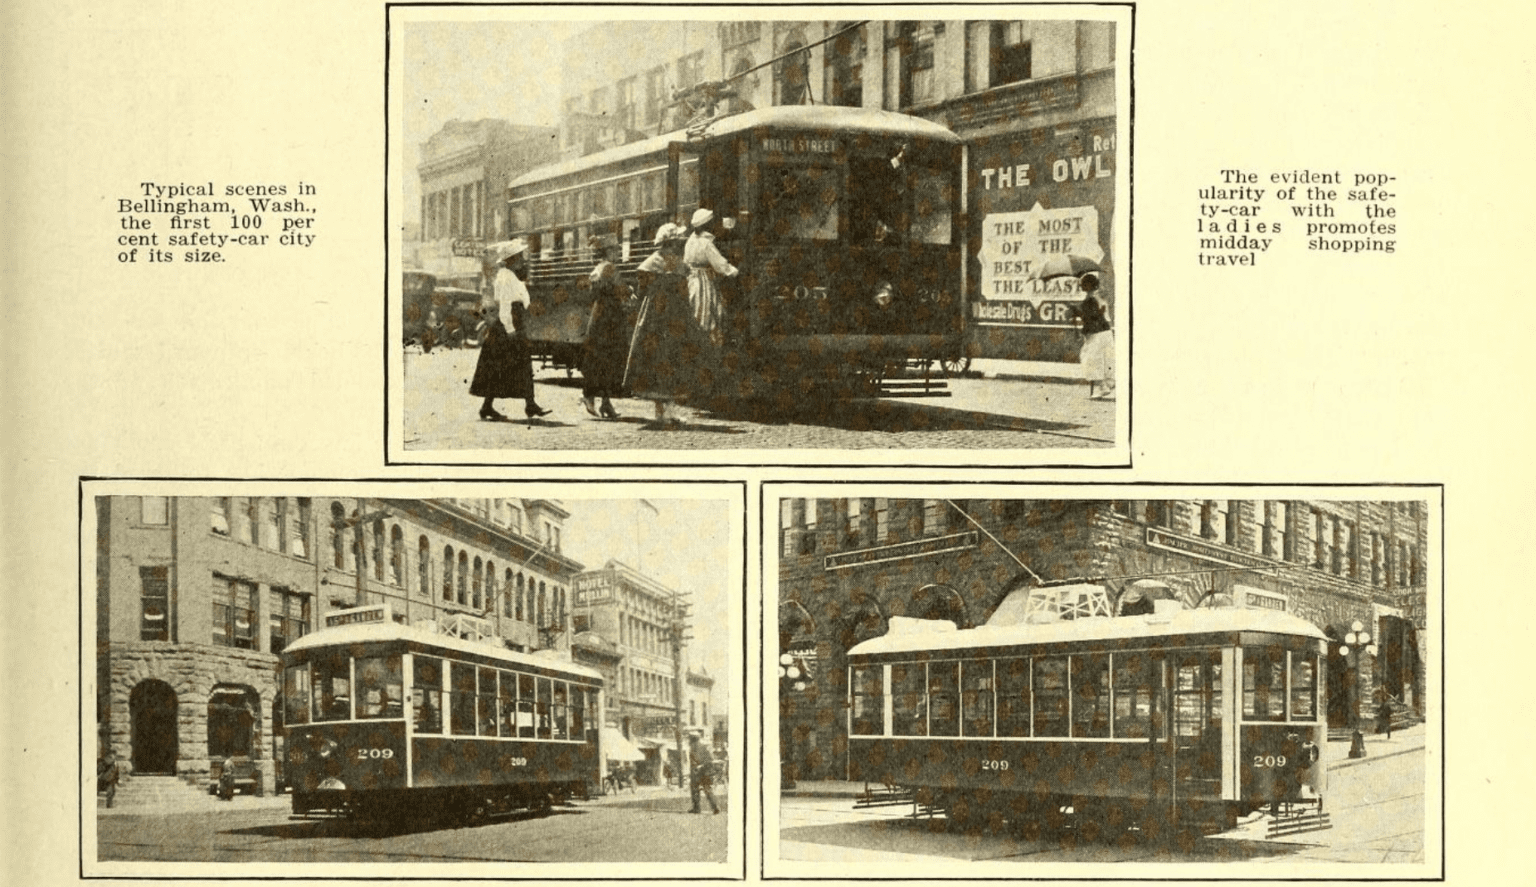 A series of images from the 1918 edition of the Electric Railway Journal show "typical scenes in Bellingham